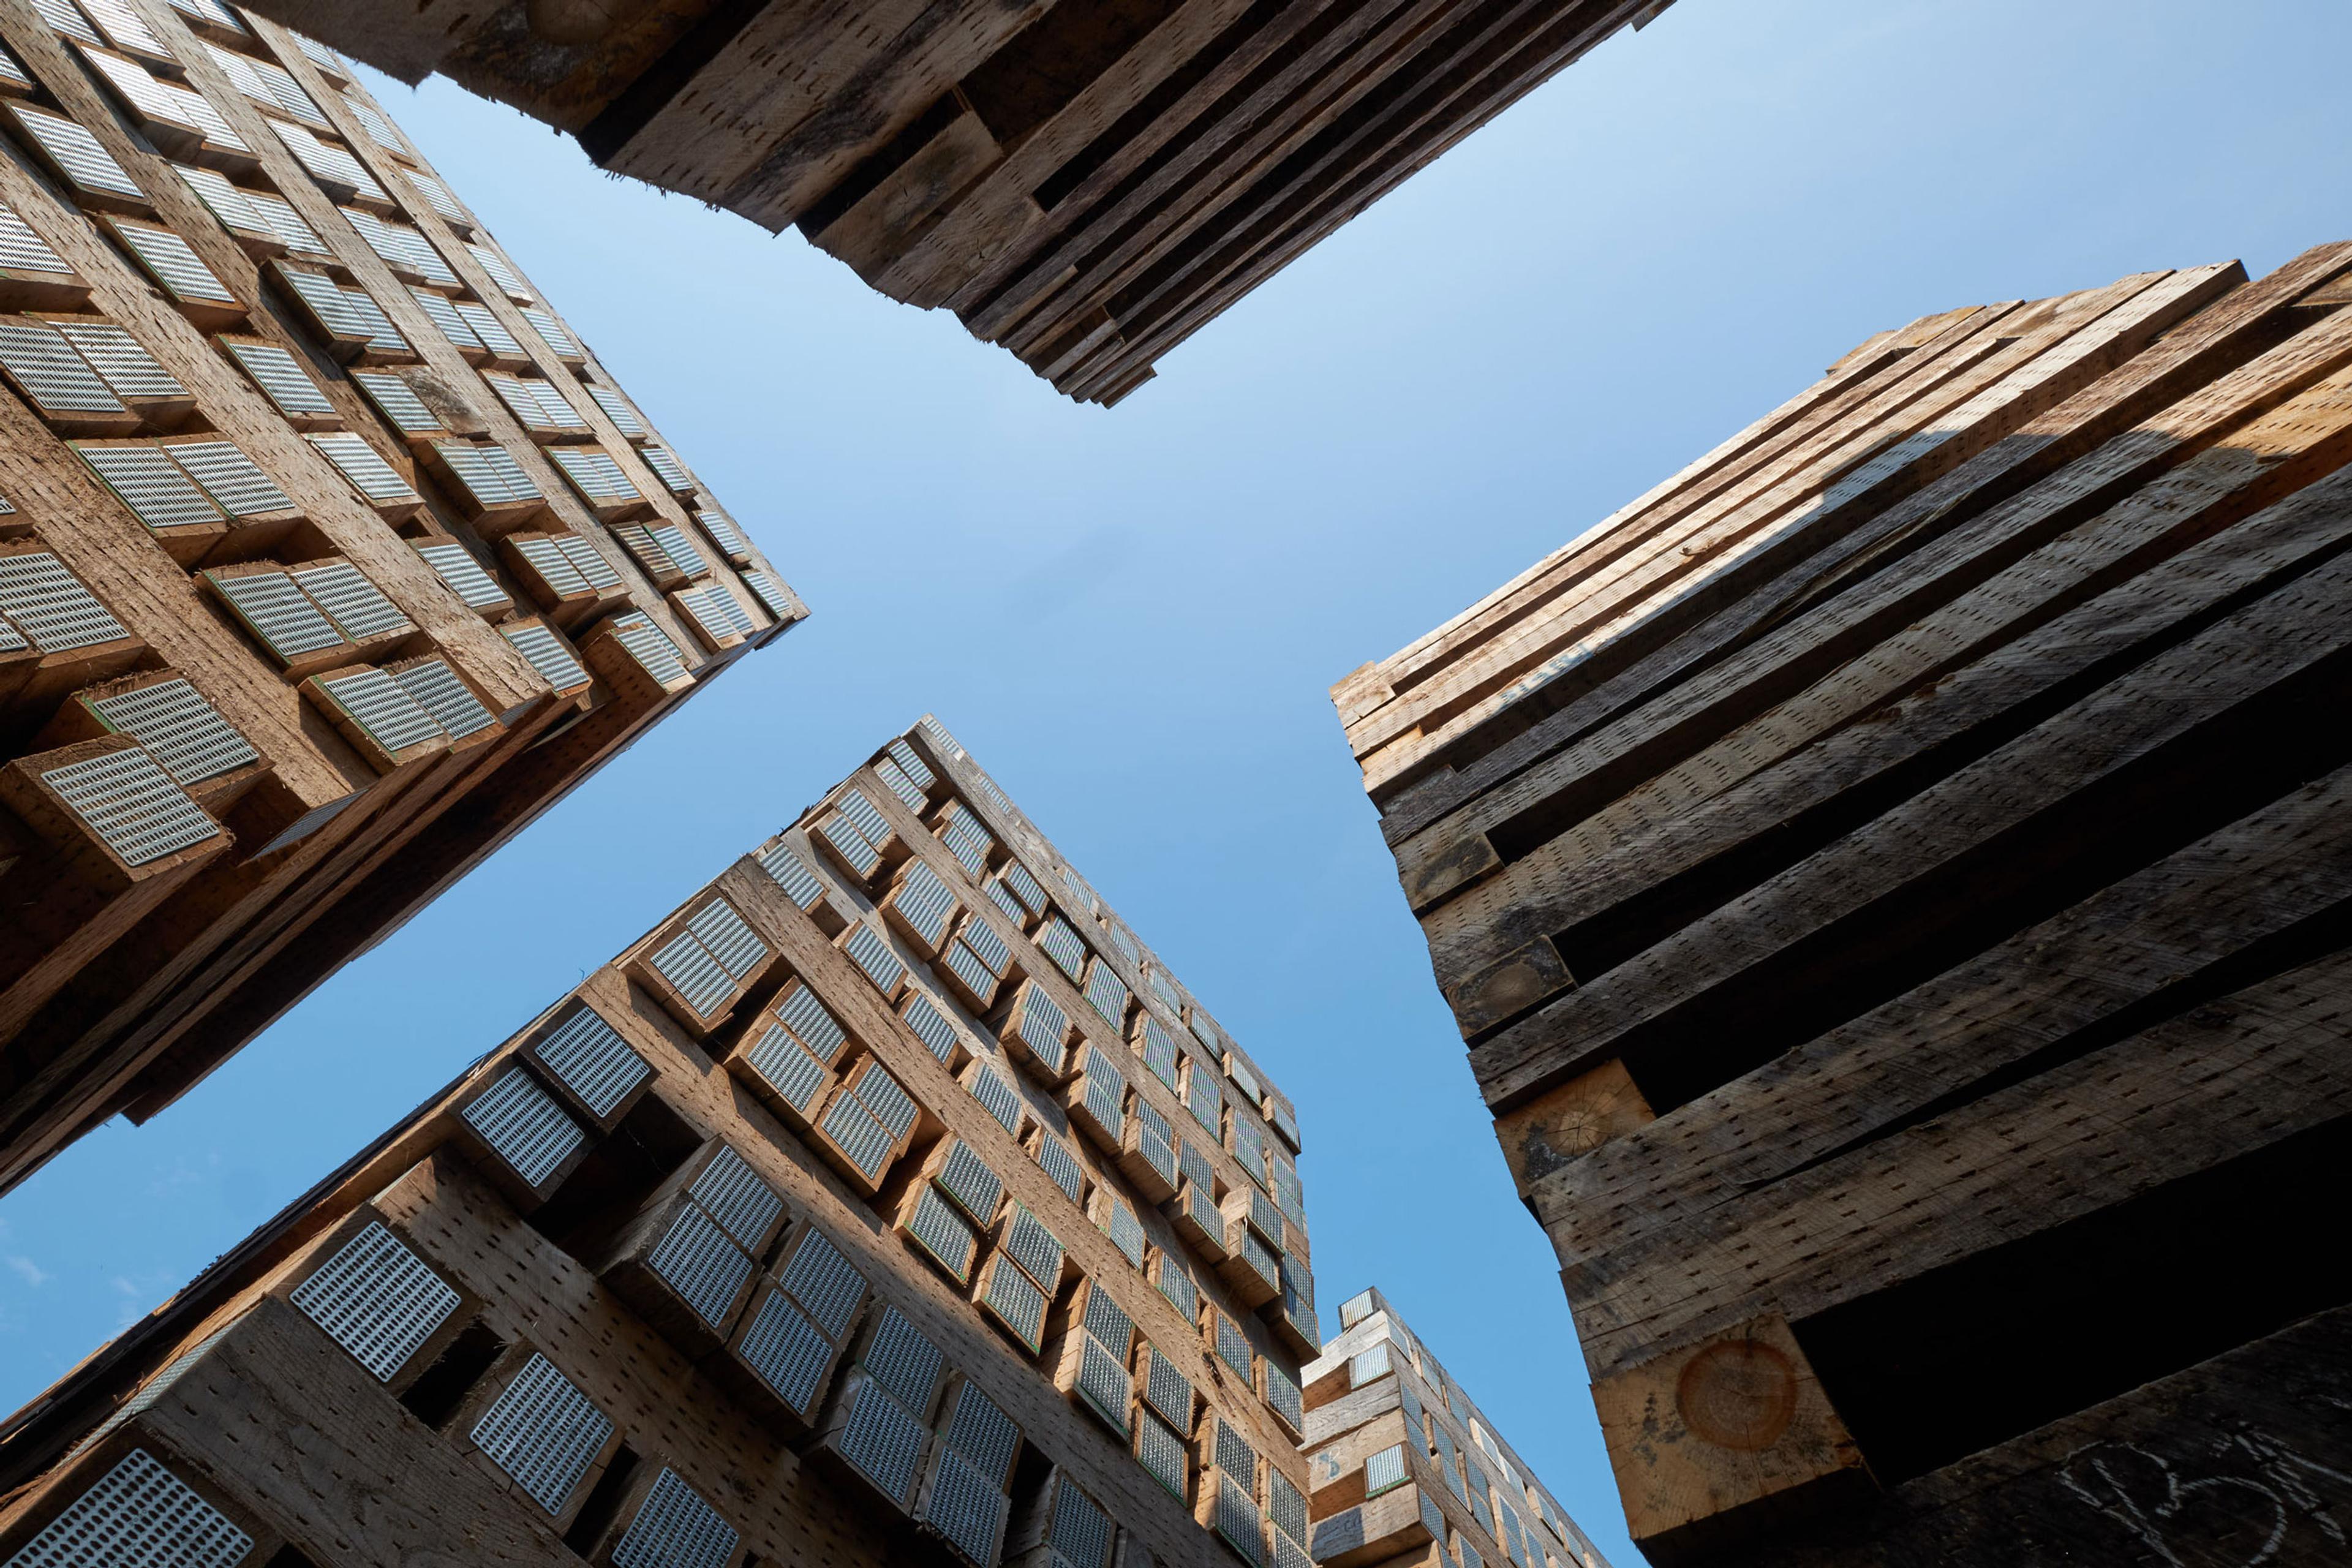 Koppers' wood stacked